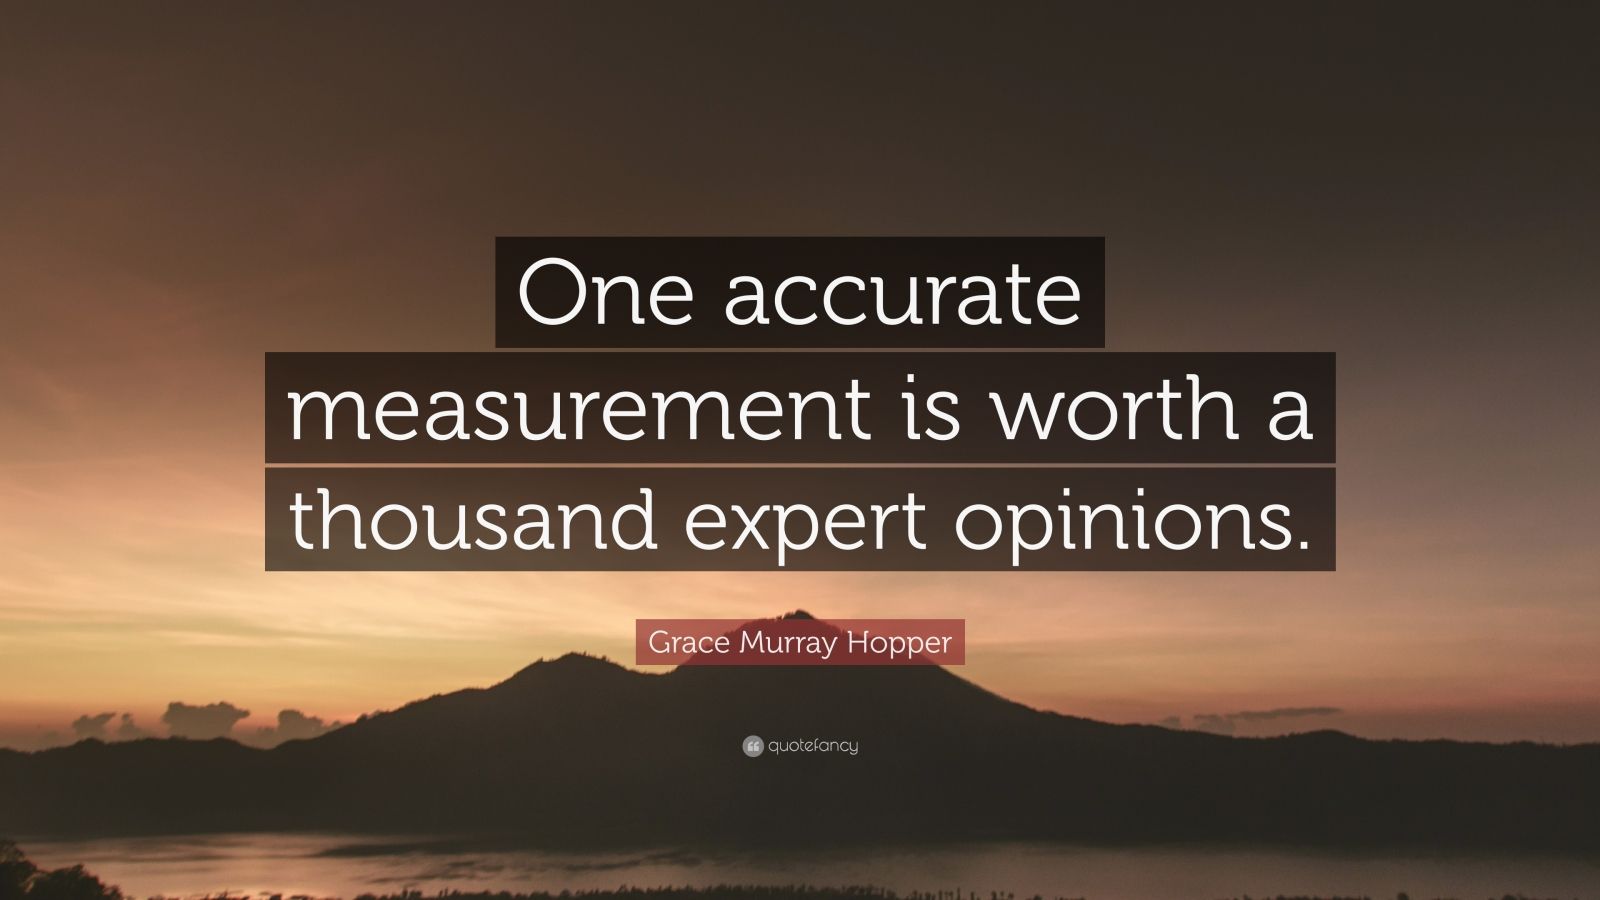 Grace Murray Hopper Quote: “One accurate measurement is worth a